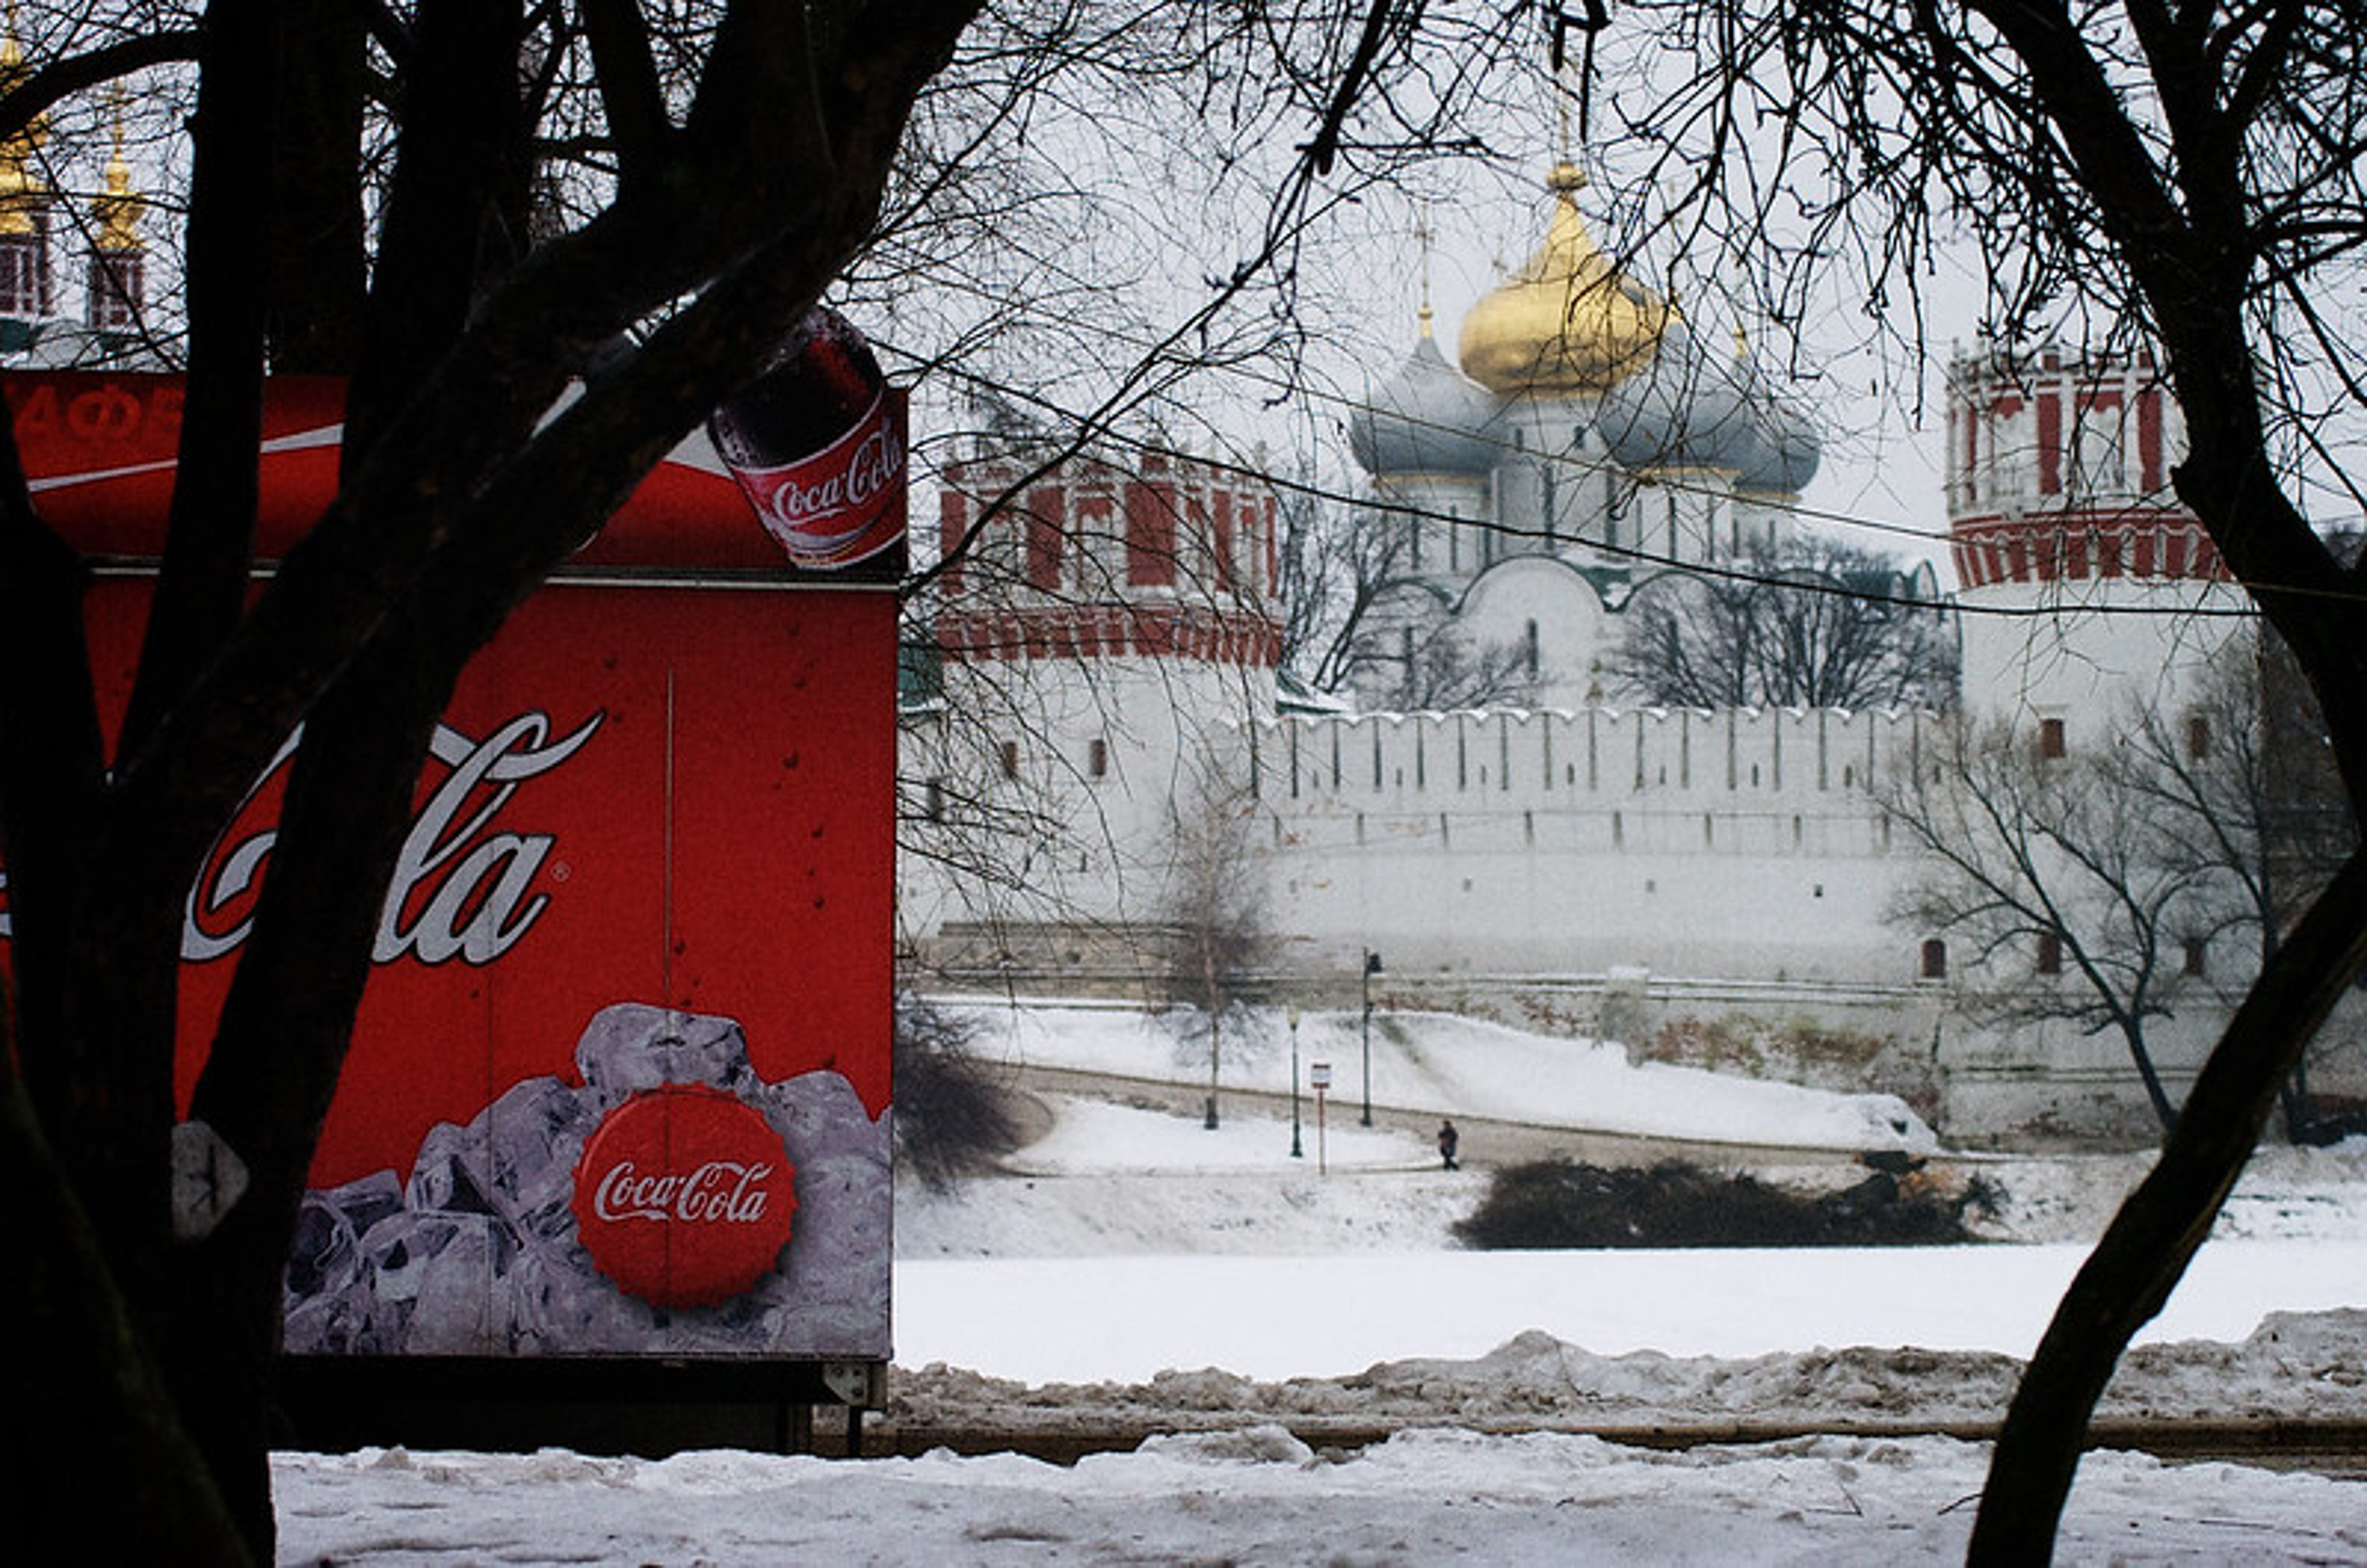 Coca-Cola Suspends Russian Sales, PepsiCo Weighs Options On Ending Business Unit